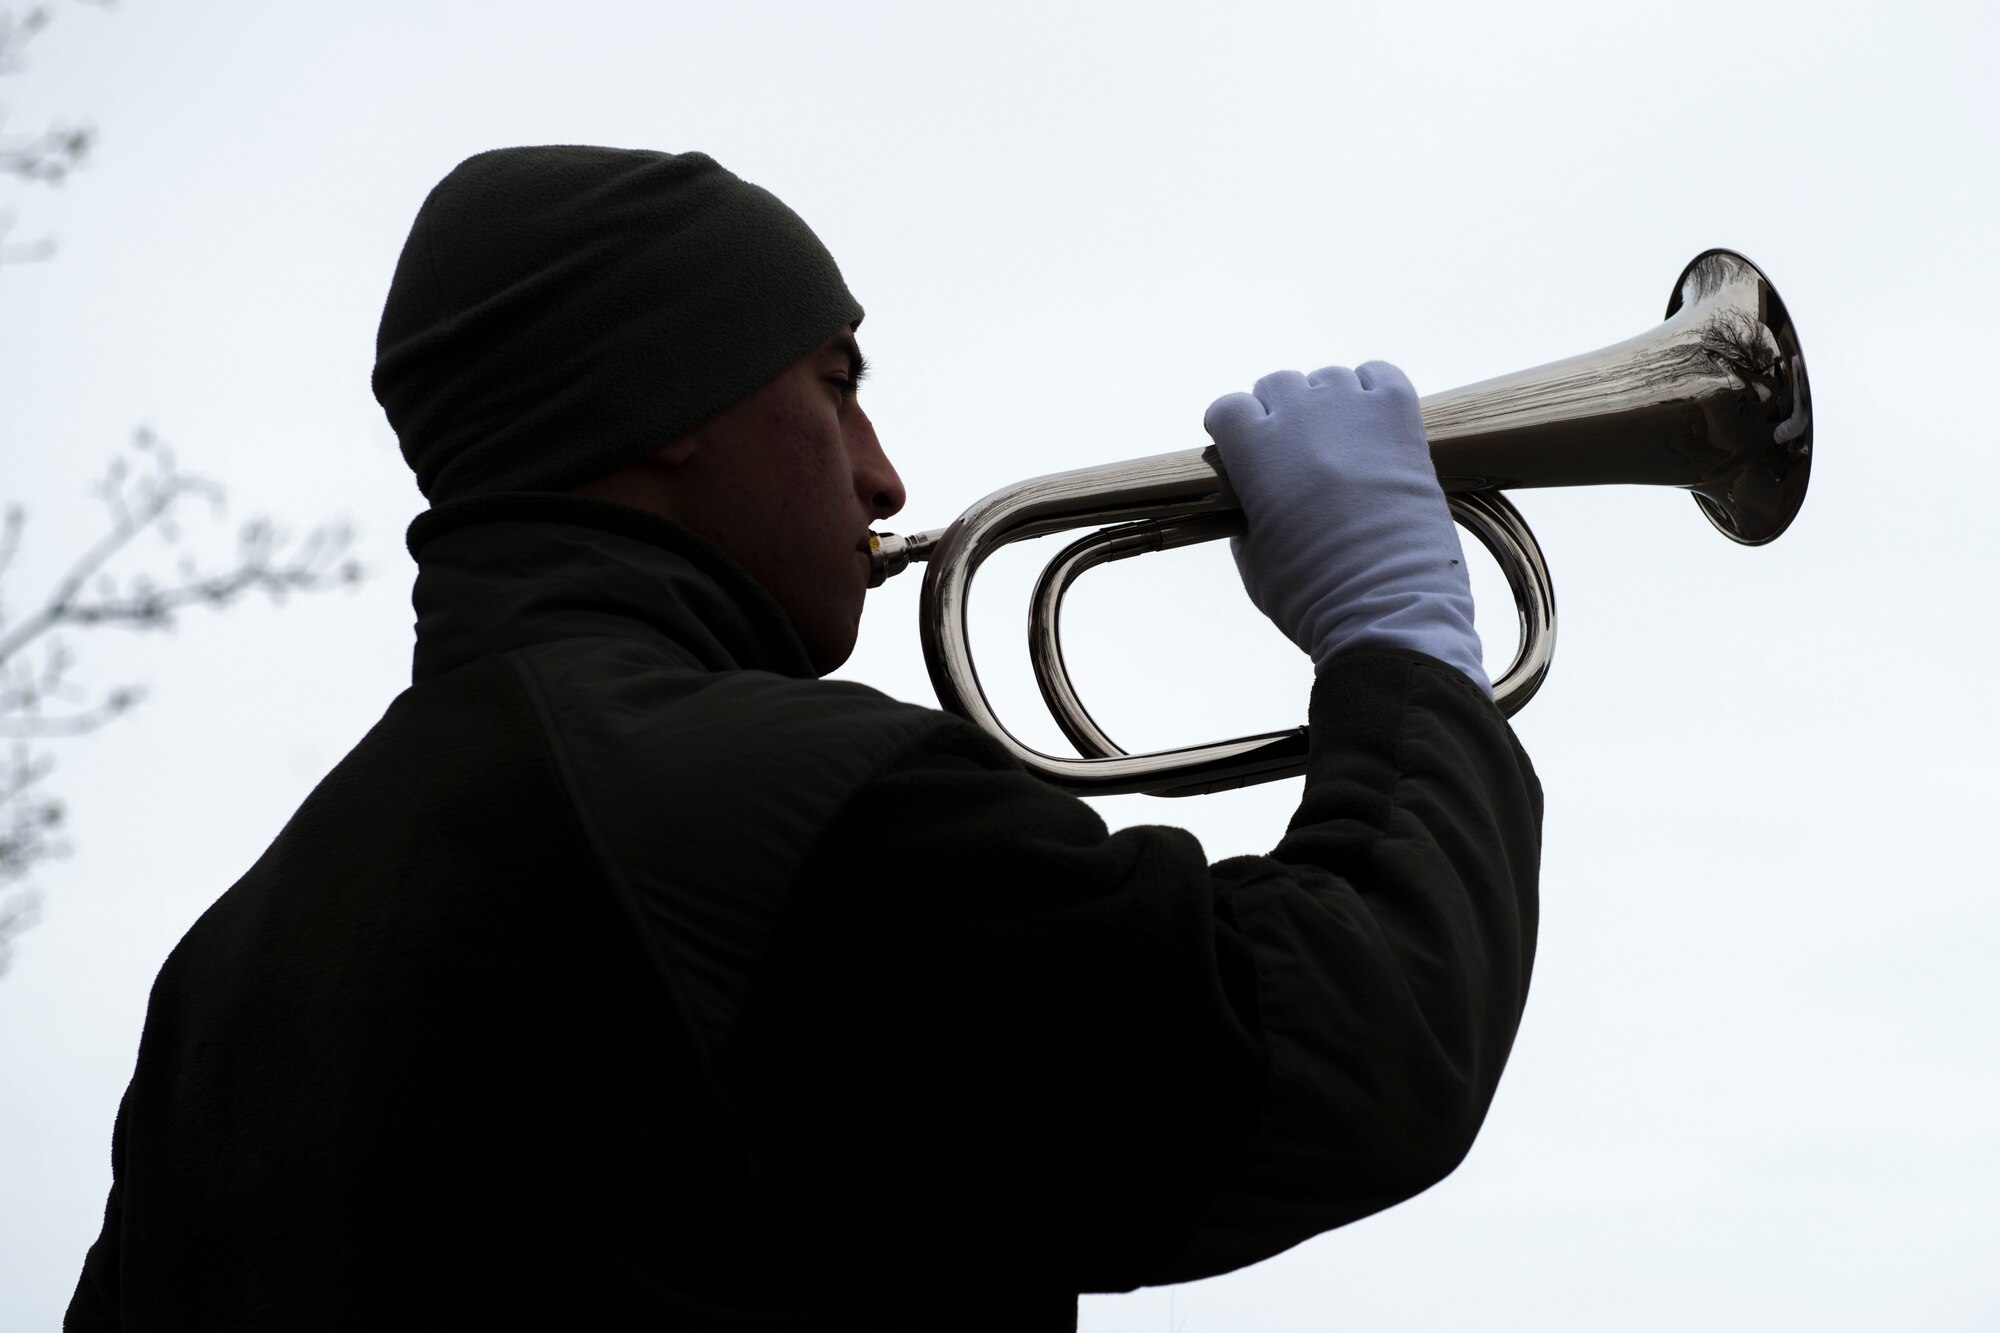 Senior Airman Naseem Eissa, 366th Fighter Wing base ceremonial guardsman, plays taps during funeral sequence training Dec. 7, 2018, at Mountain Home Air Force Base, Idaho. The U.S. Air Force Honor Guard held a ceremonial guardsman training course Dec. 3-12 to help the base honor guard maintain their skills during multiple member sequence training. (U.S. Air Force photo by Airman 1st Class JaNae Capuno)